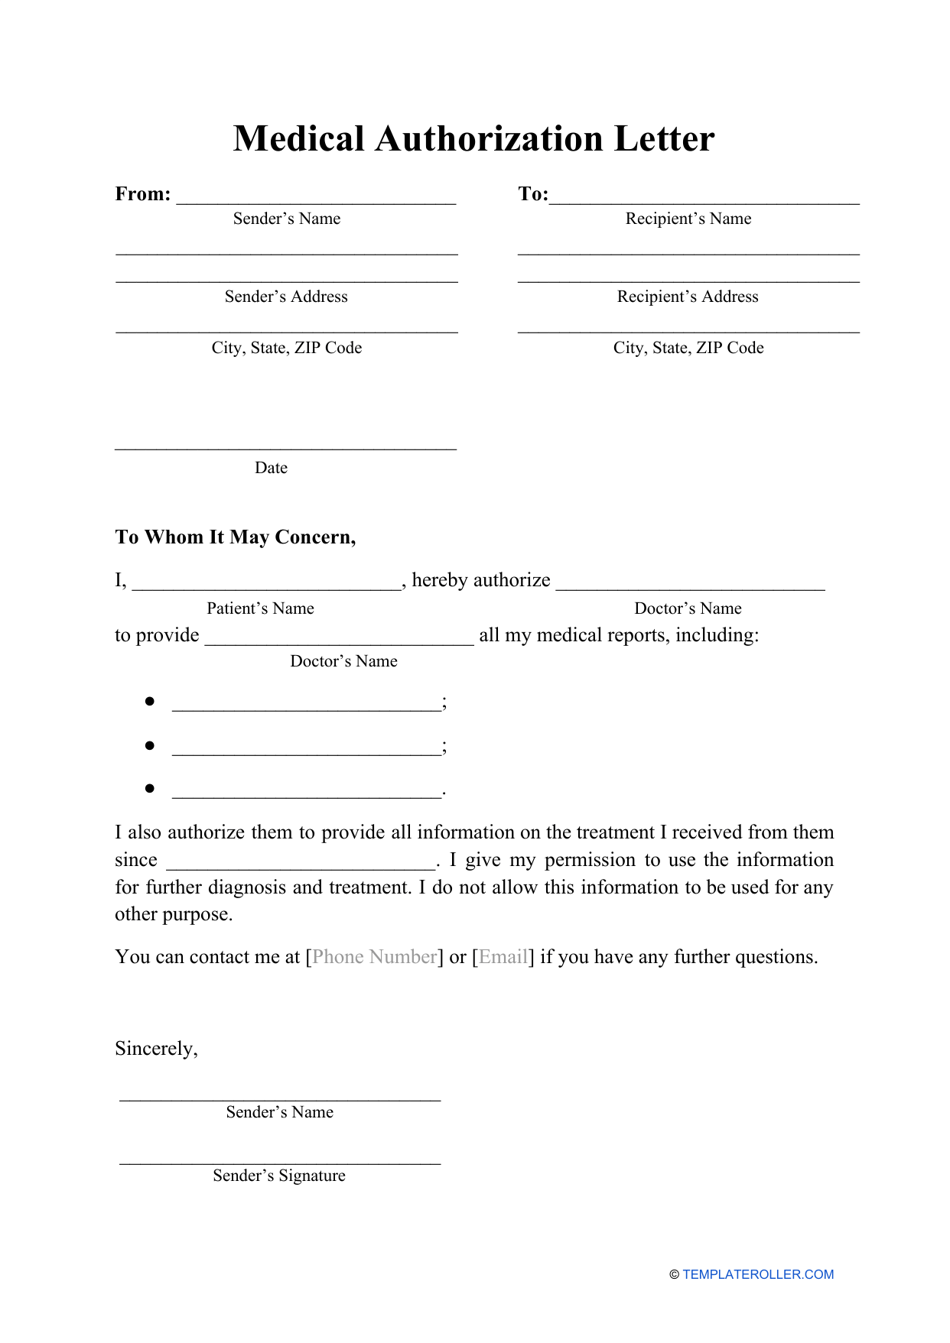 Medical Authorization Letter Template Download Printable Pdf Templateroller 9649